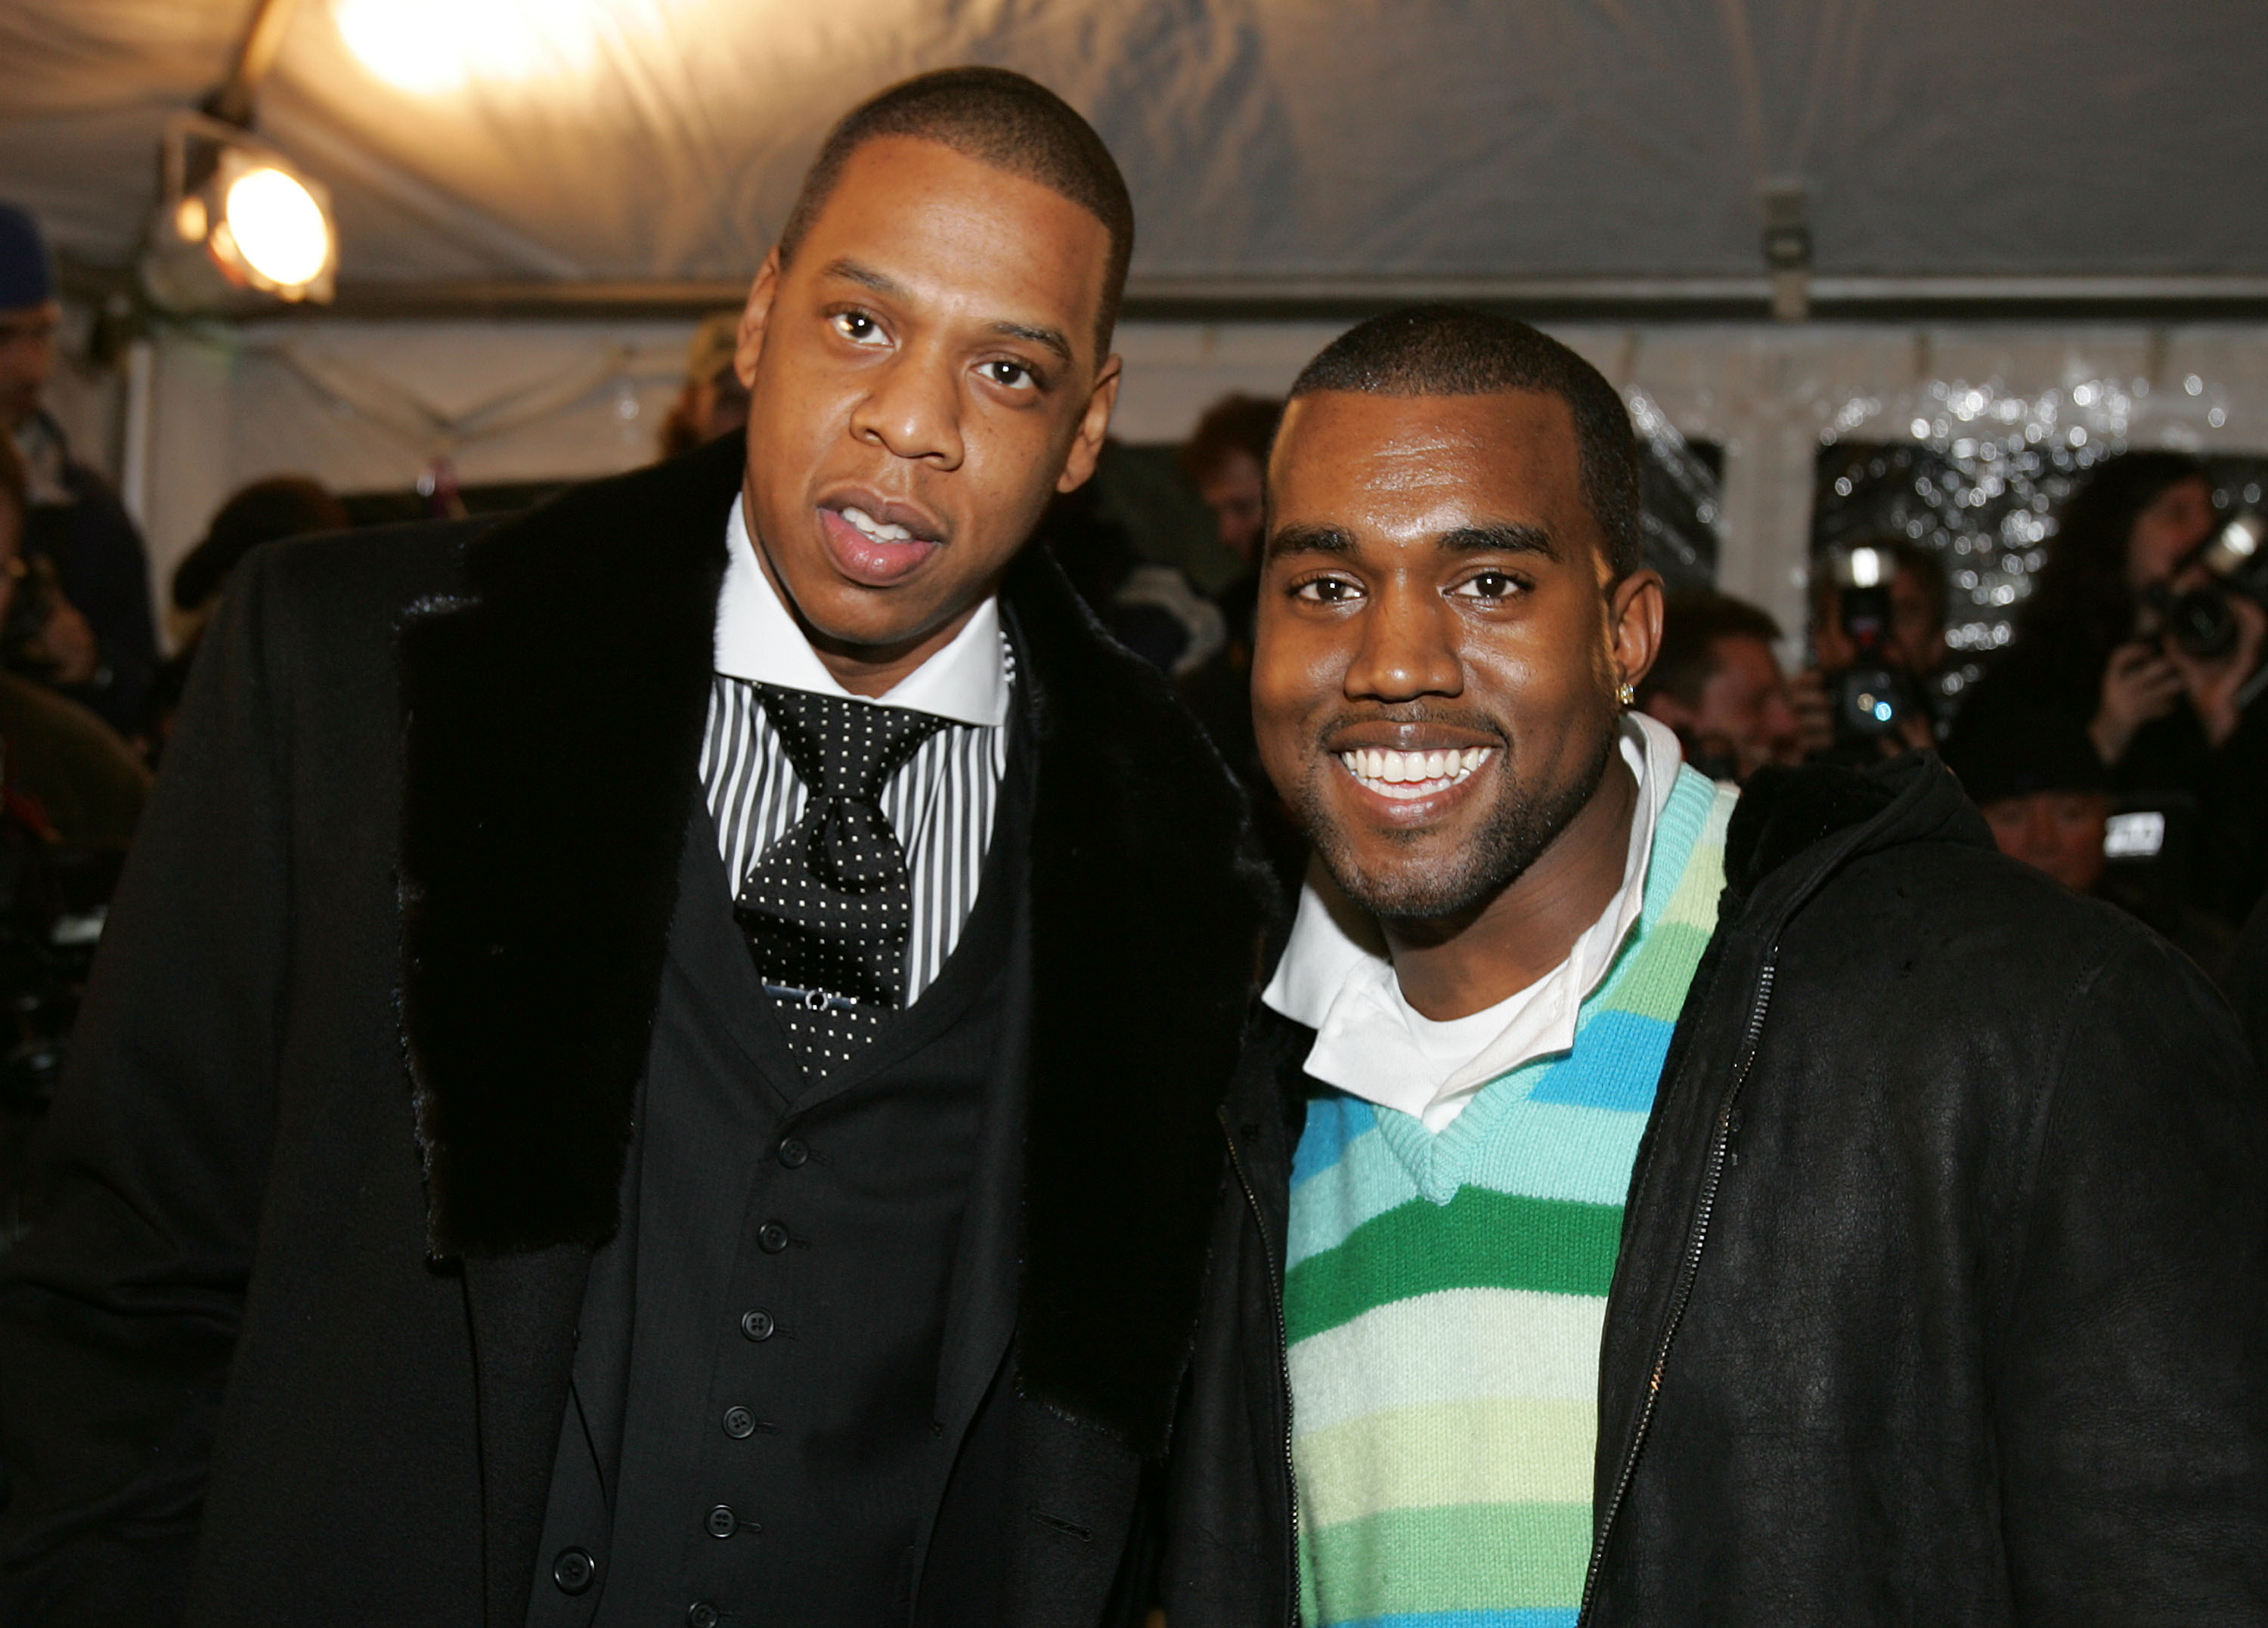 Jay-Z and Kanye West wearing collared shirts